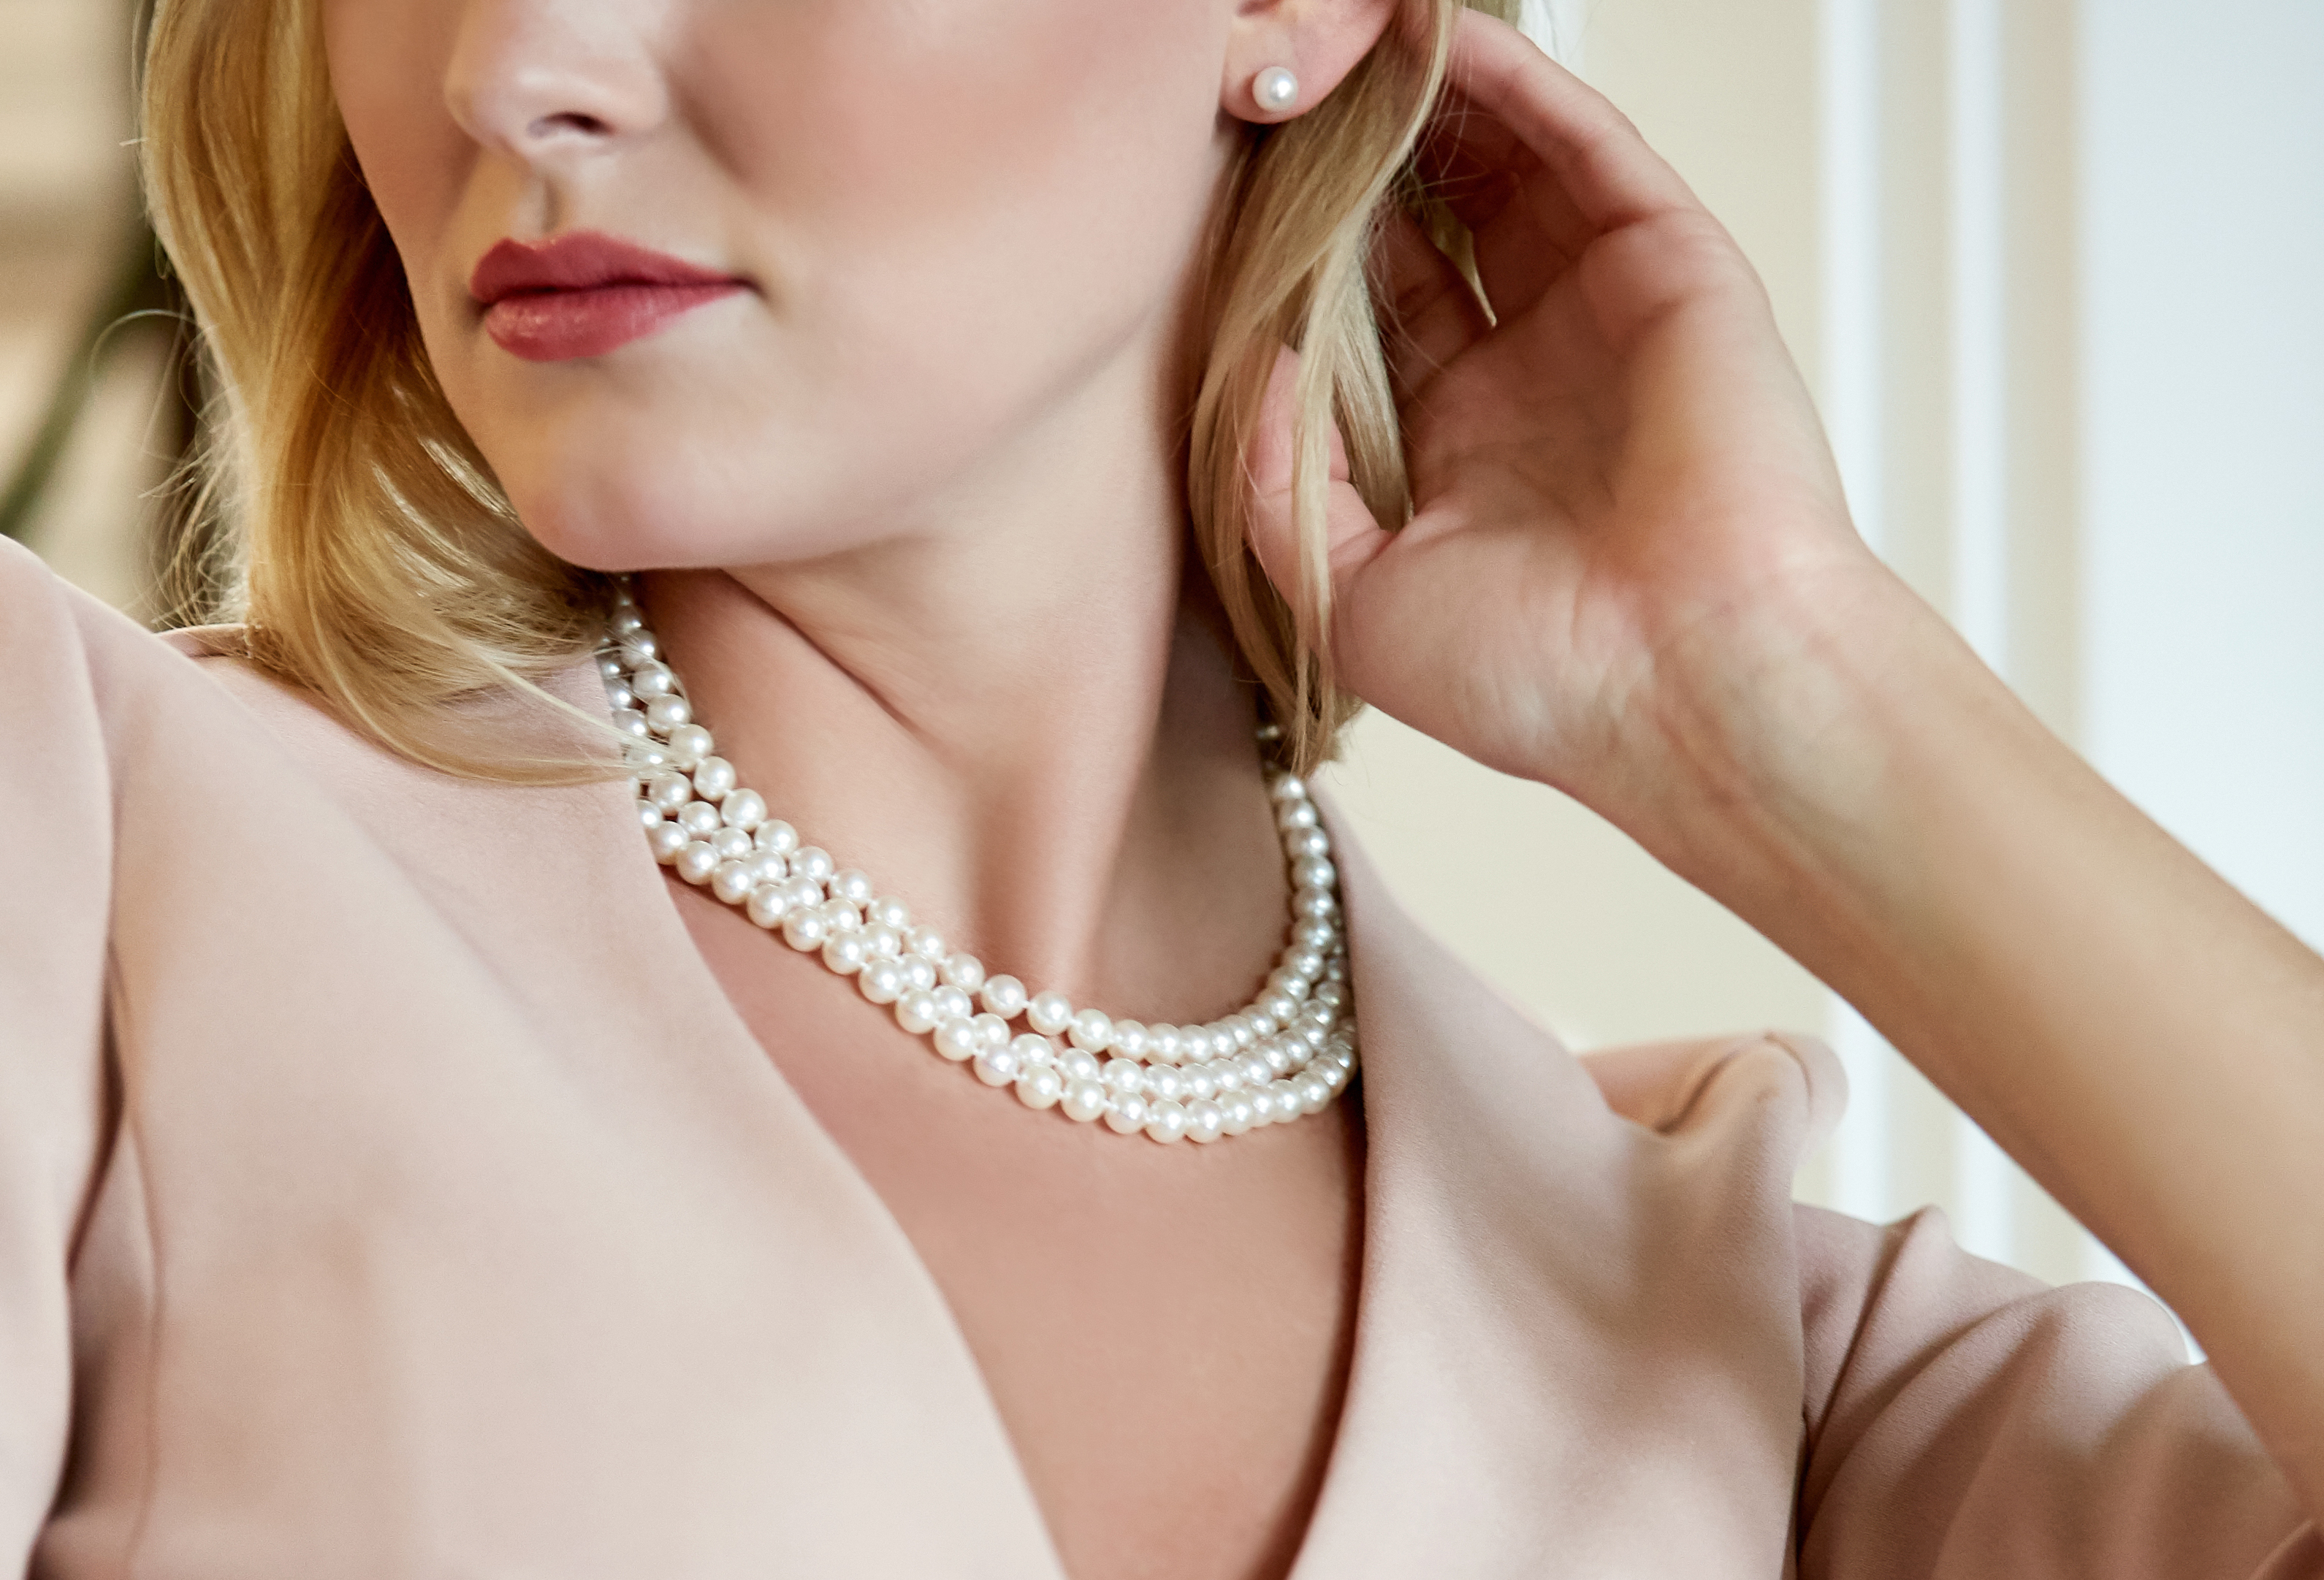 Pearl Necklace Buying Guide: 7 Things to Consider - PearlsOnly ::  PearlsOnly | Save up to 80% with Pearls Only France